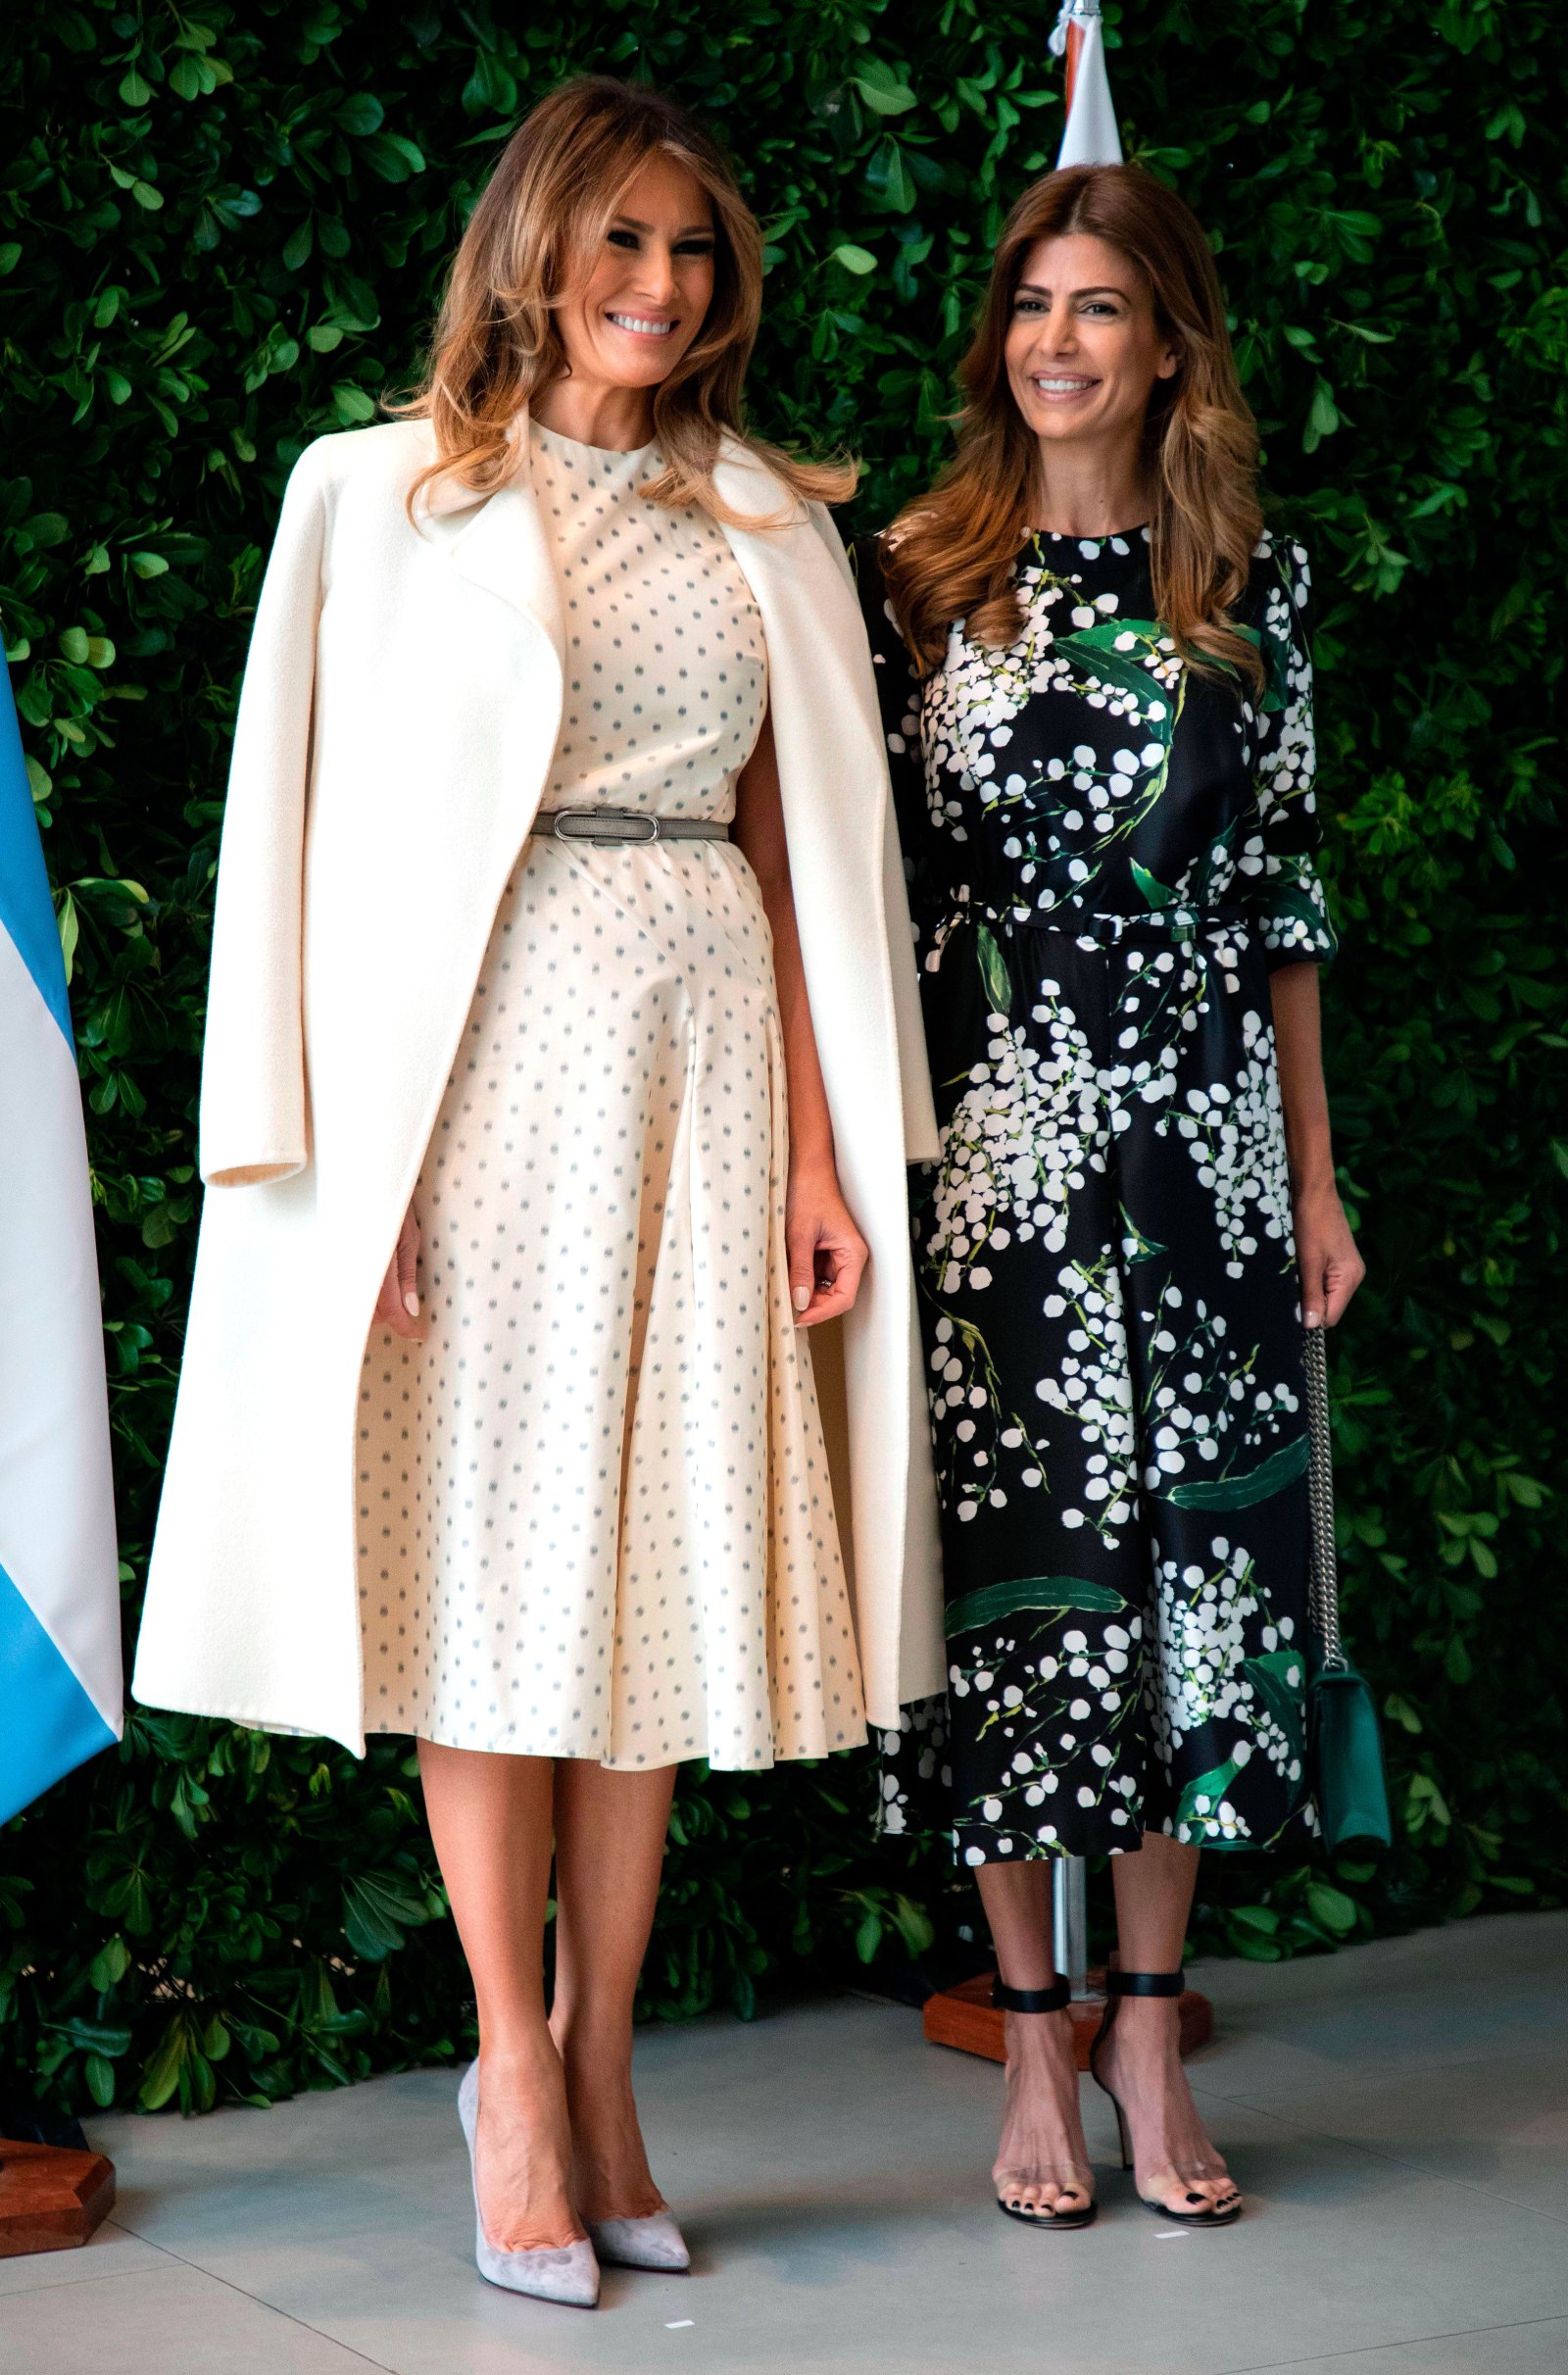 Melania Trumps Most Stylish First Lady Moments